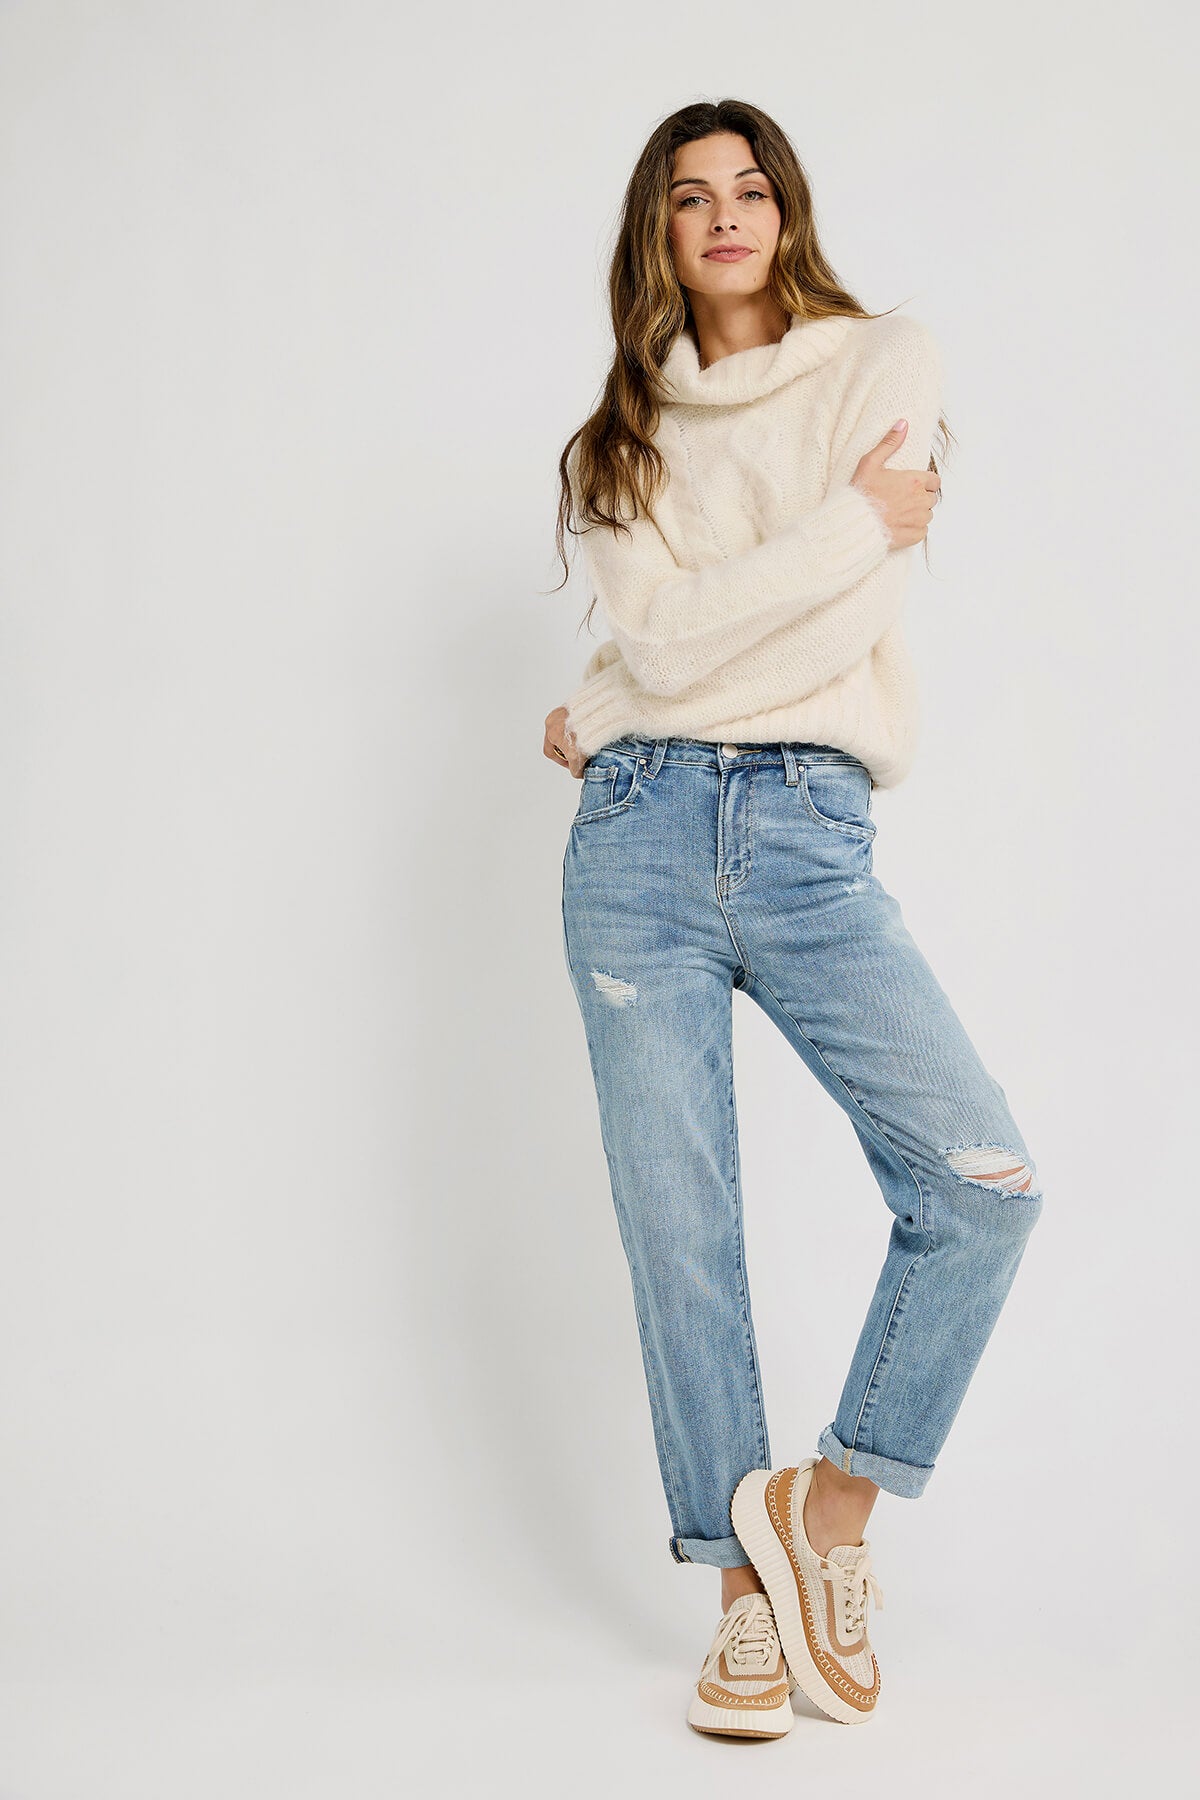 Molly Bracken Cable Turtleneck Sweater